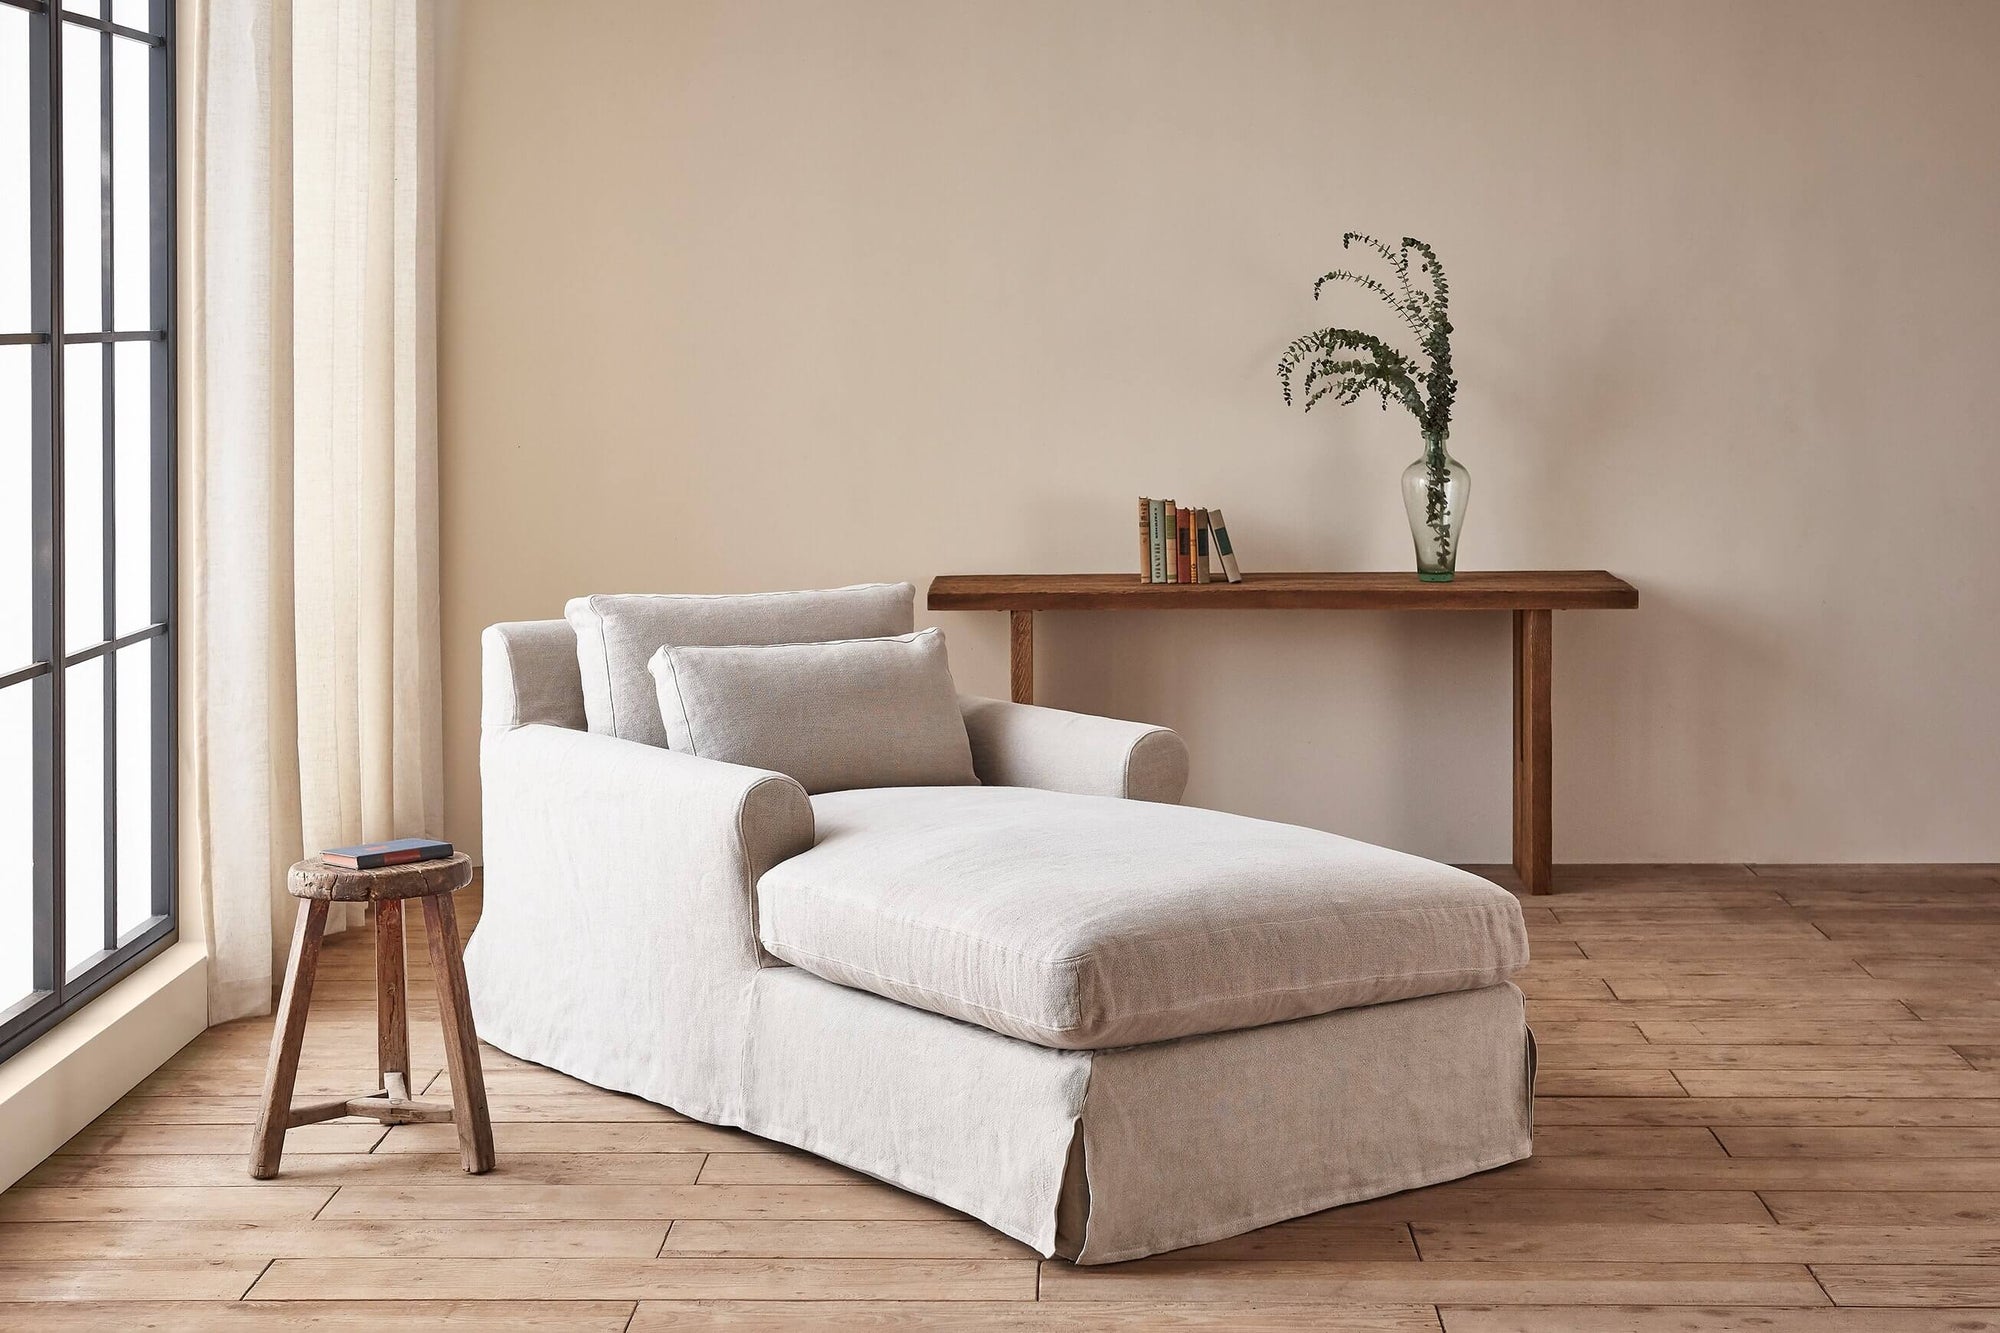 Elias Daybed in Jasmine Rice, a light warm greige Medium Weight Linen, placed in a sunlit room with a wooden stool and console table decorated with books